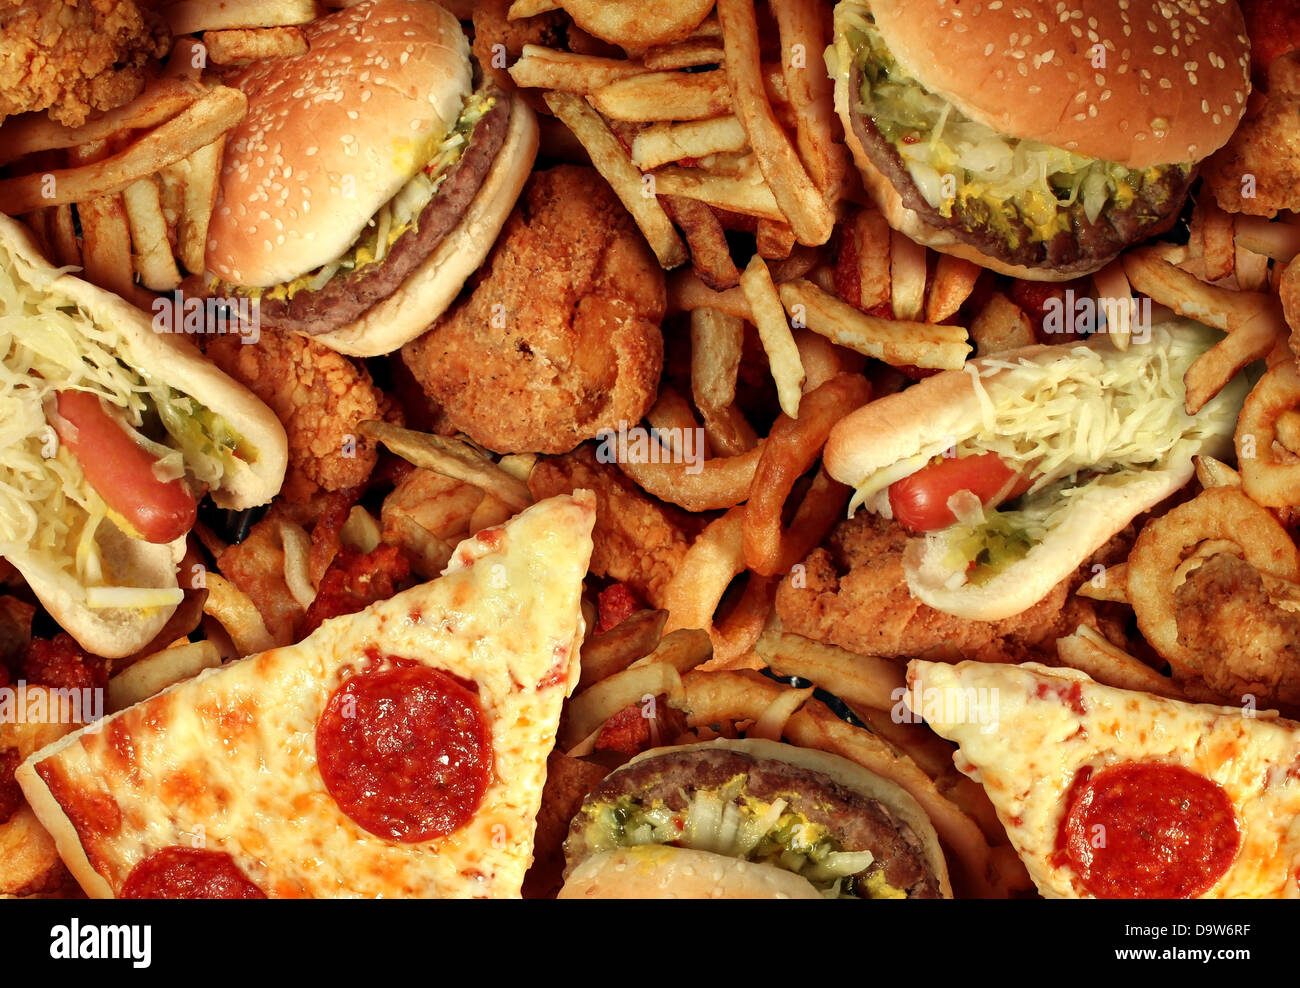 Fast food concept with greasy fried restaurant take out as onion rings burger and hot dogs with fried chicken french fries and p Stock Photo